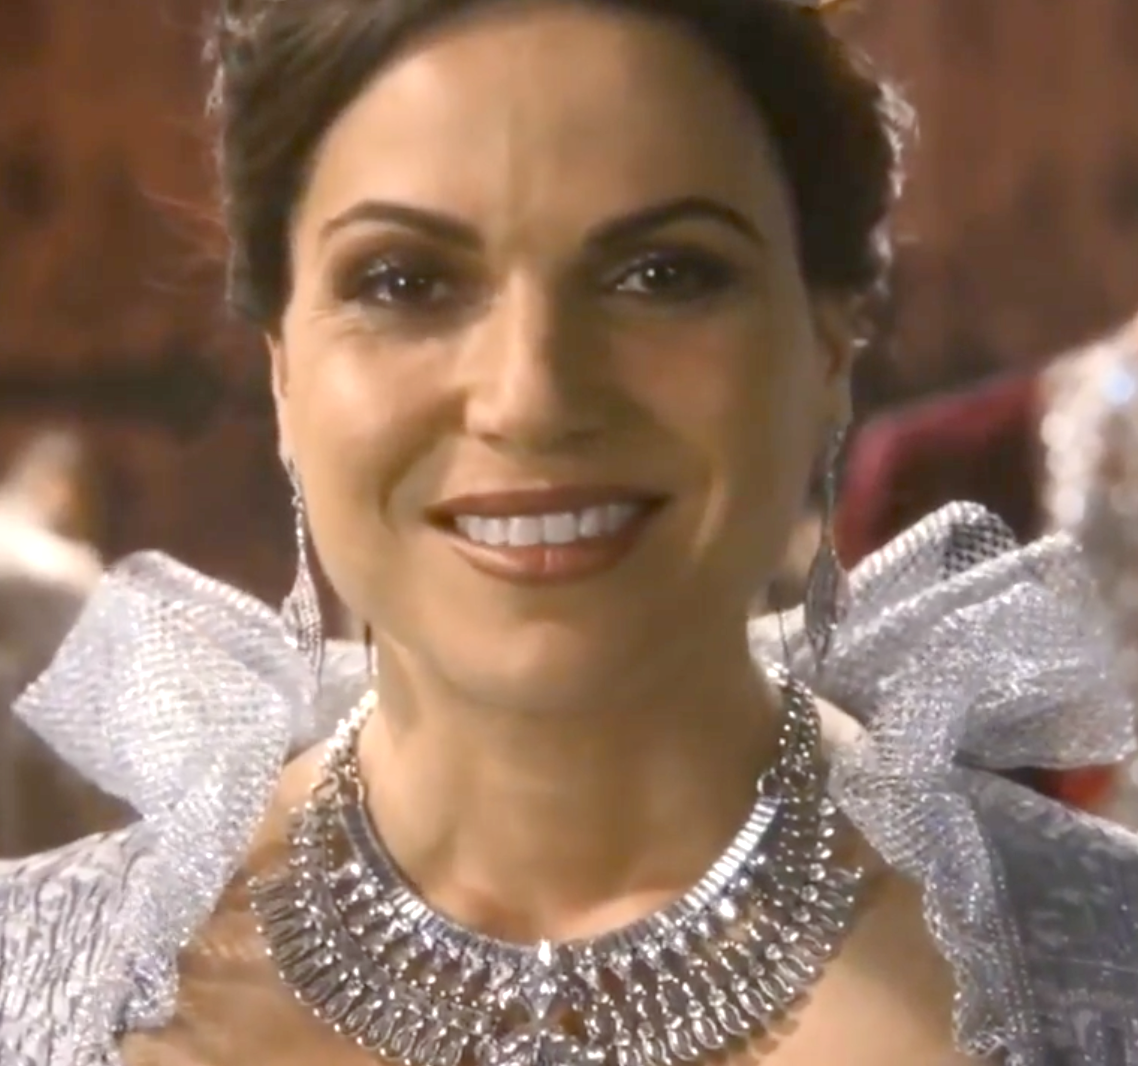 Regina smiling as she&#x27;s crowned